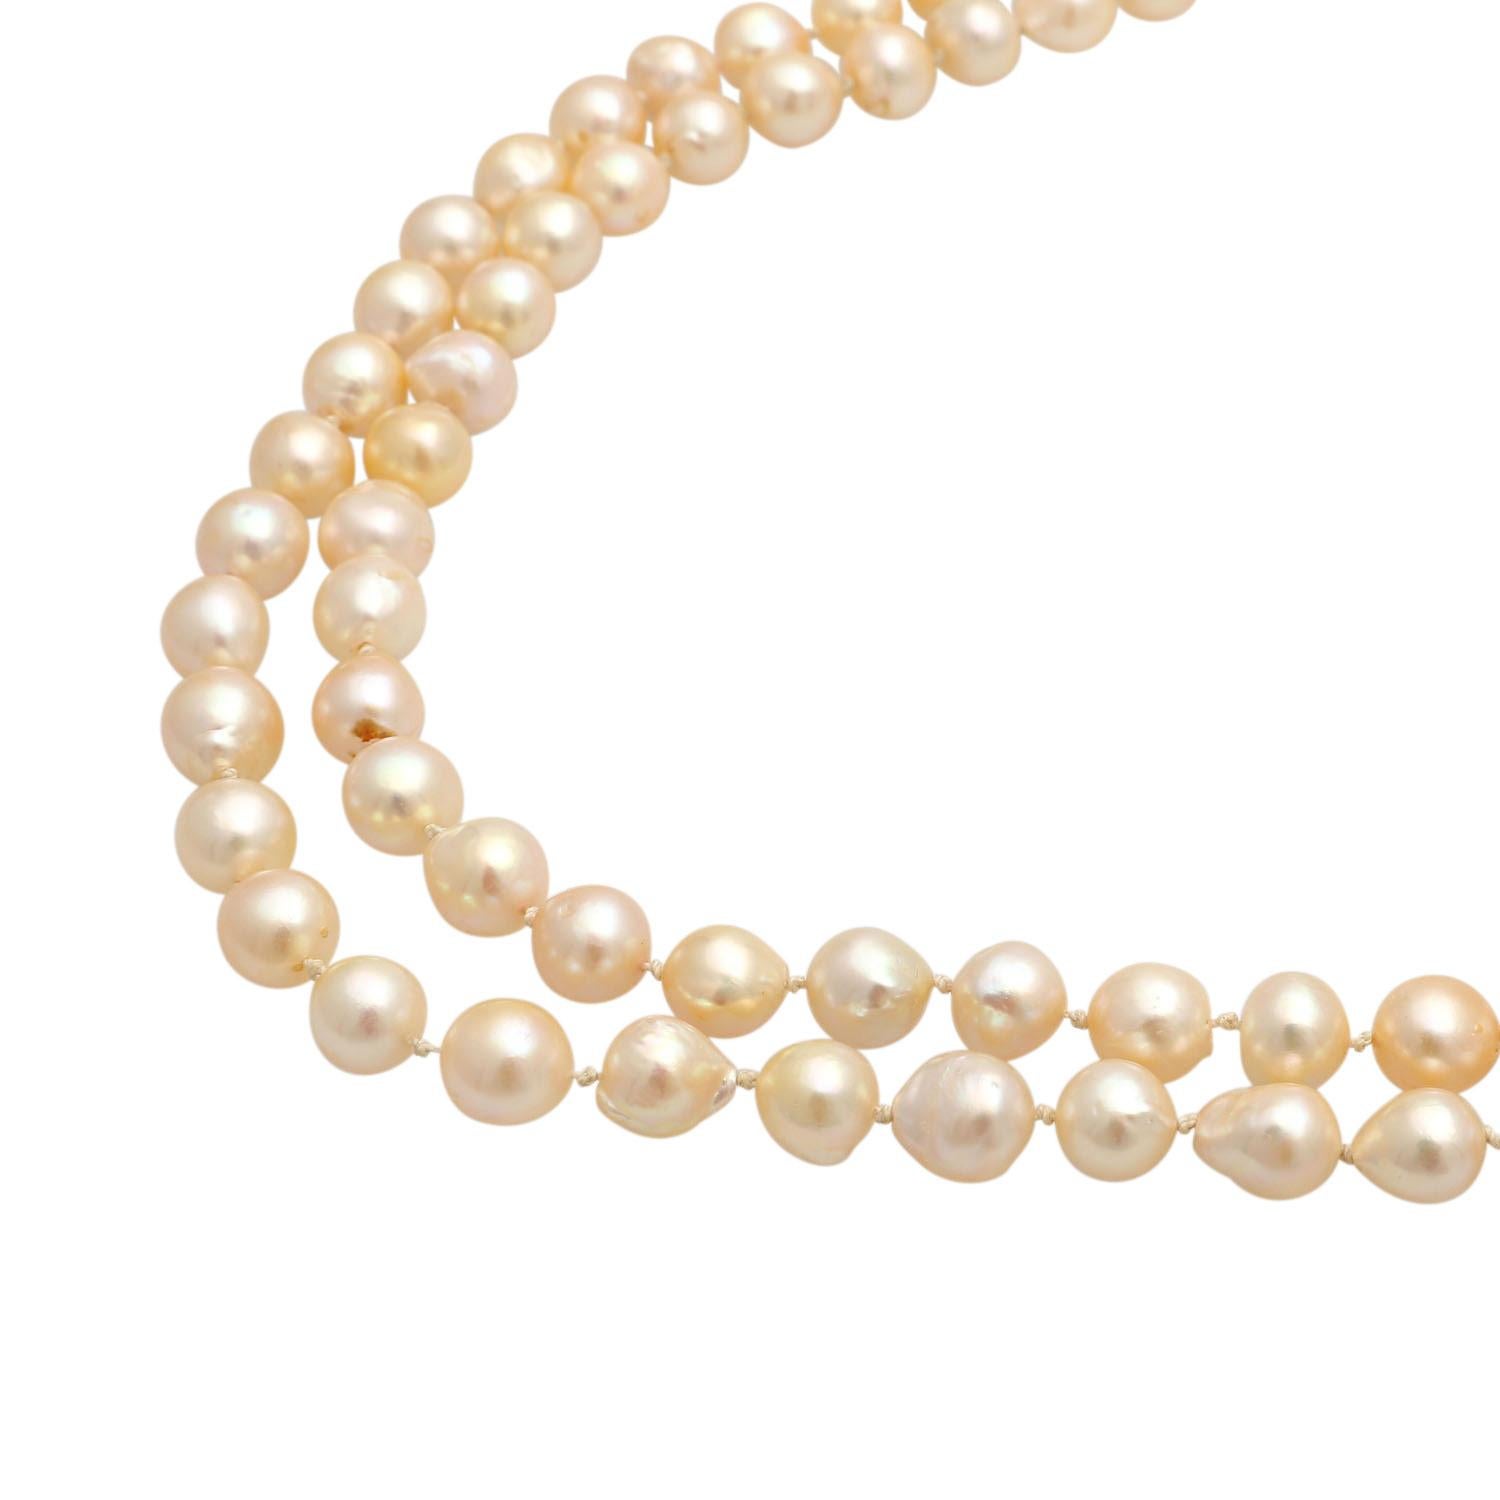 Uncut Long Necklace of Akoya Pearls For Sale